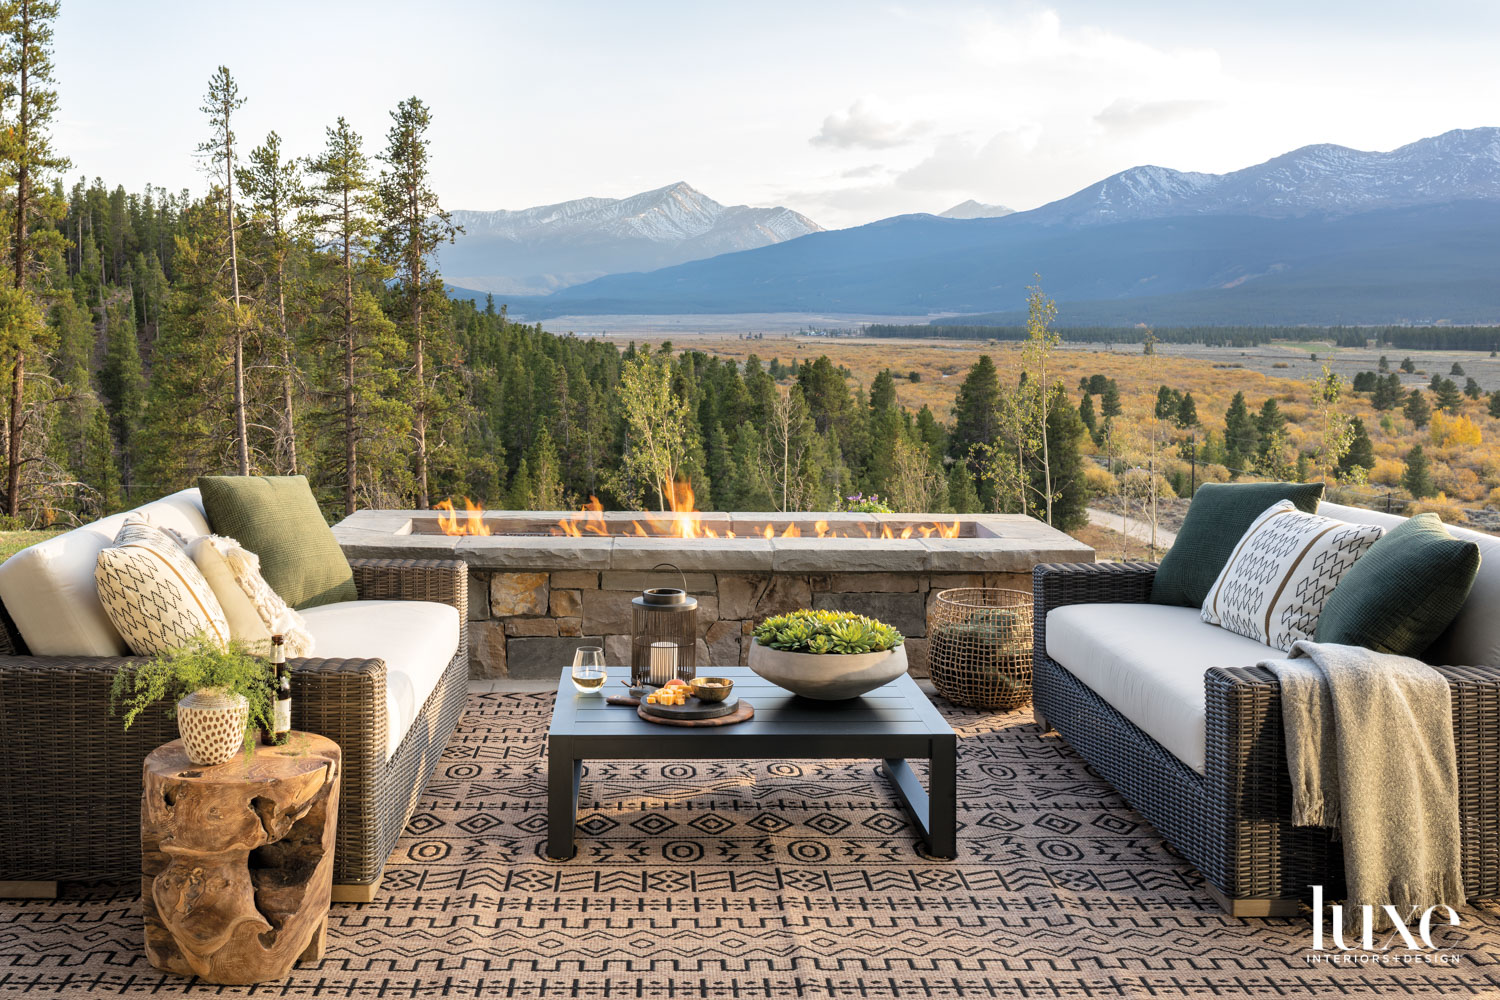 A patio has a fire pit and a view of the moutains.